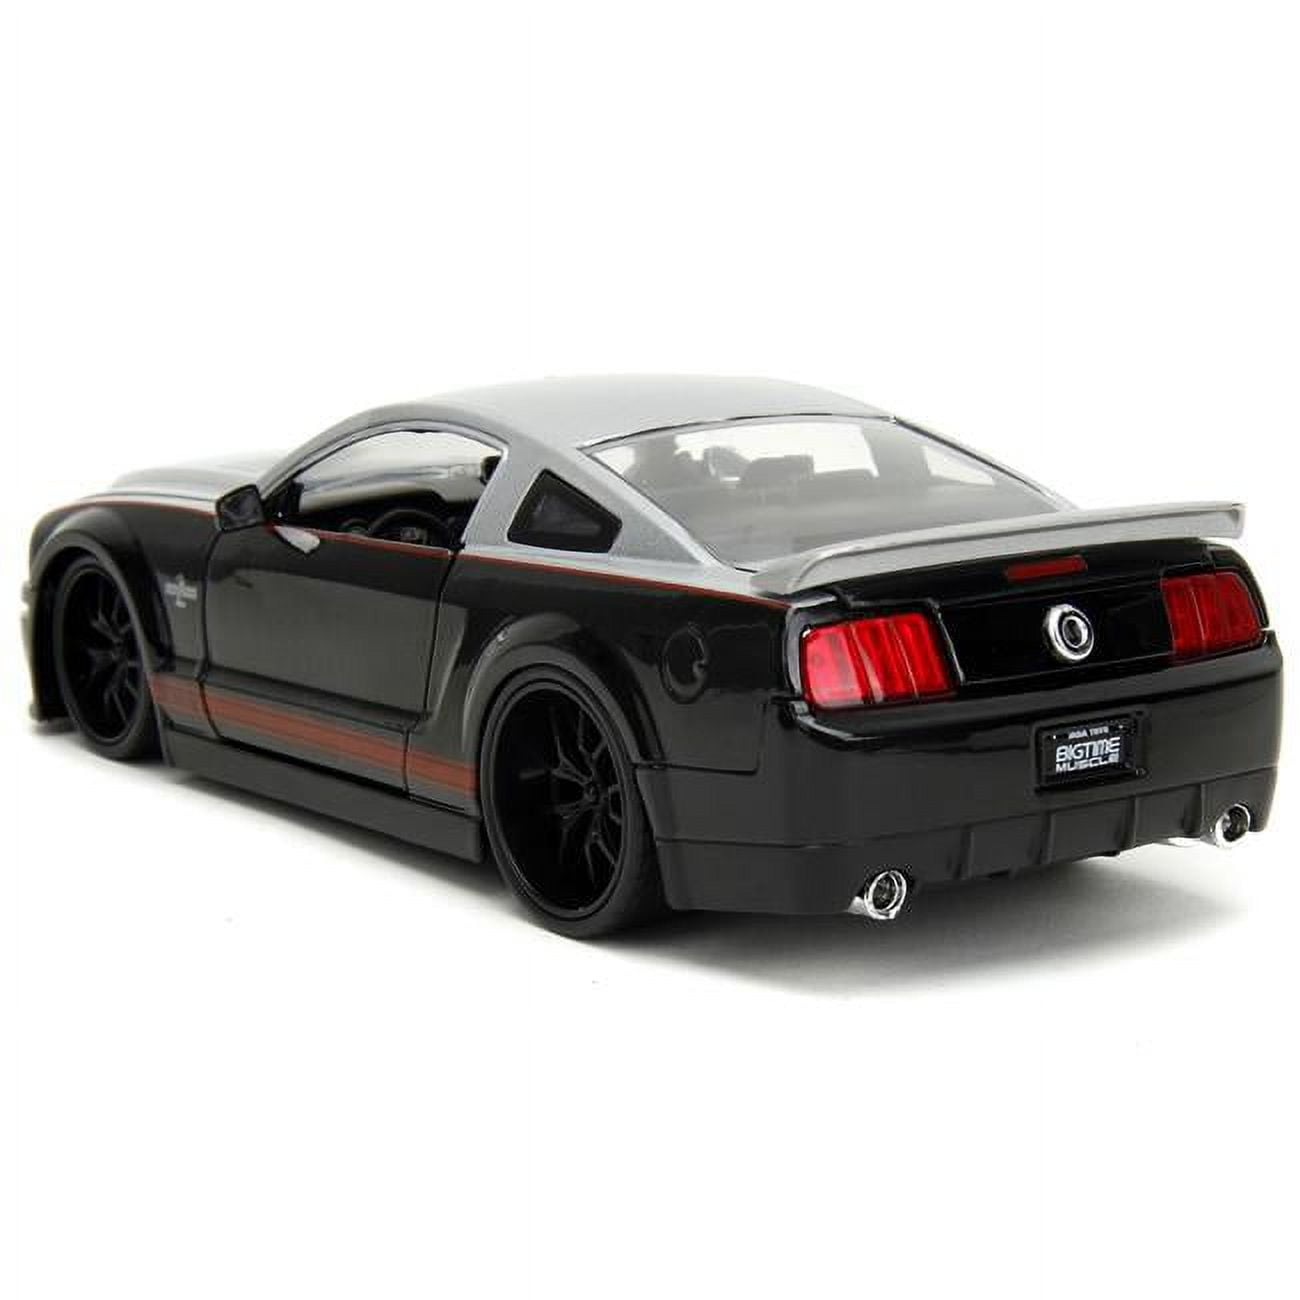 2008 Ford Shelby Mustang GT-500KR Silver & Black with Red Stripes Bigtime Muscle Series 1-24 Scale Diecast Model Car -  Endless Games, EN2952036